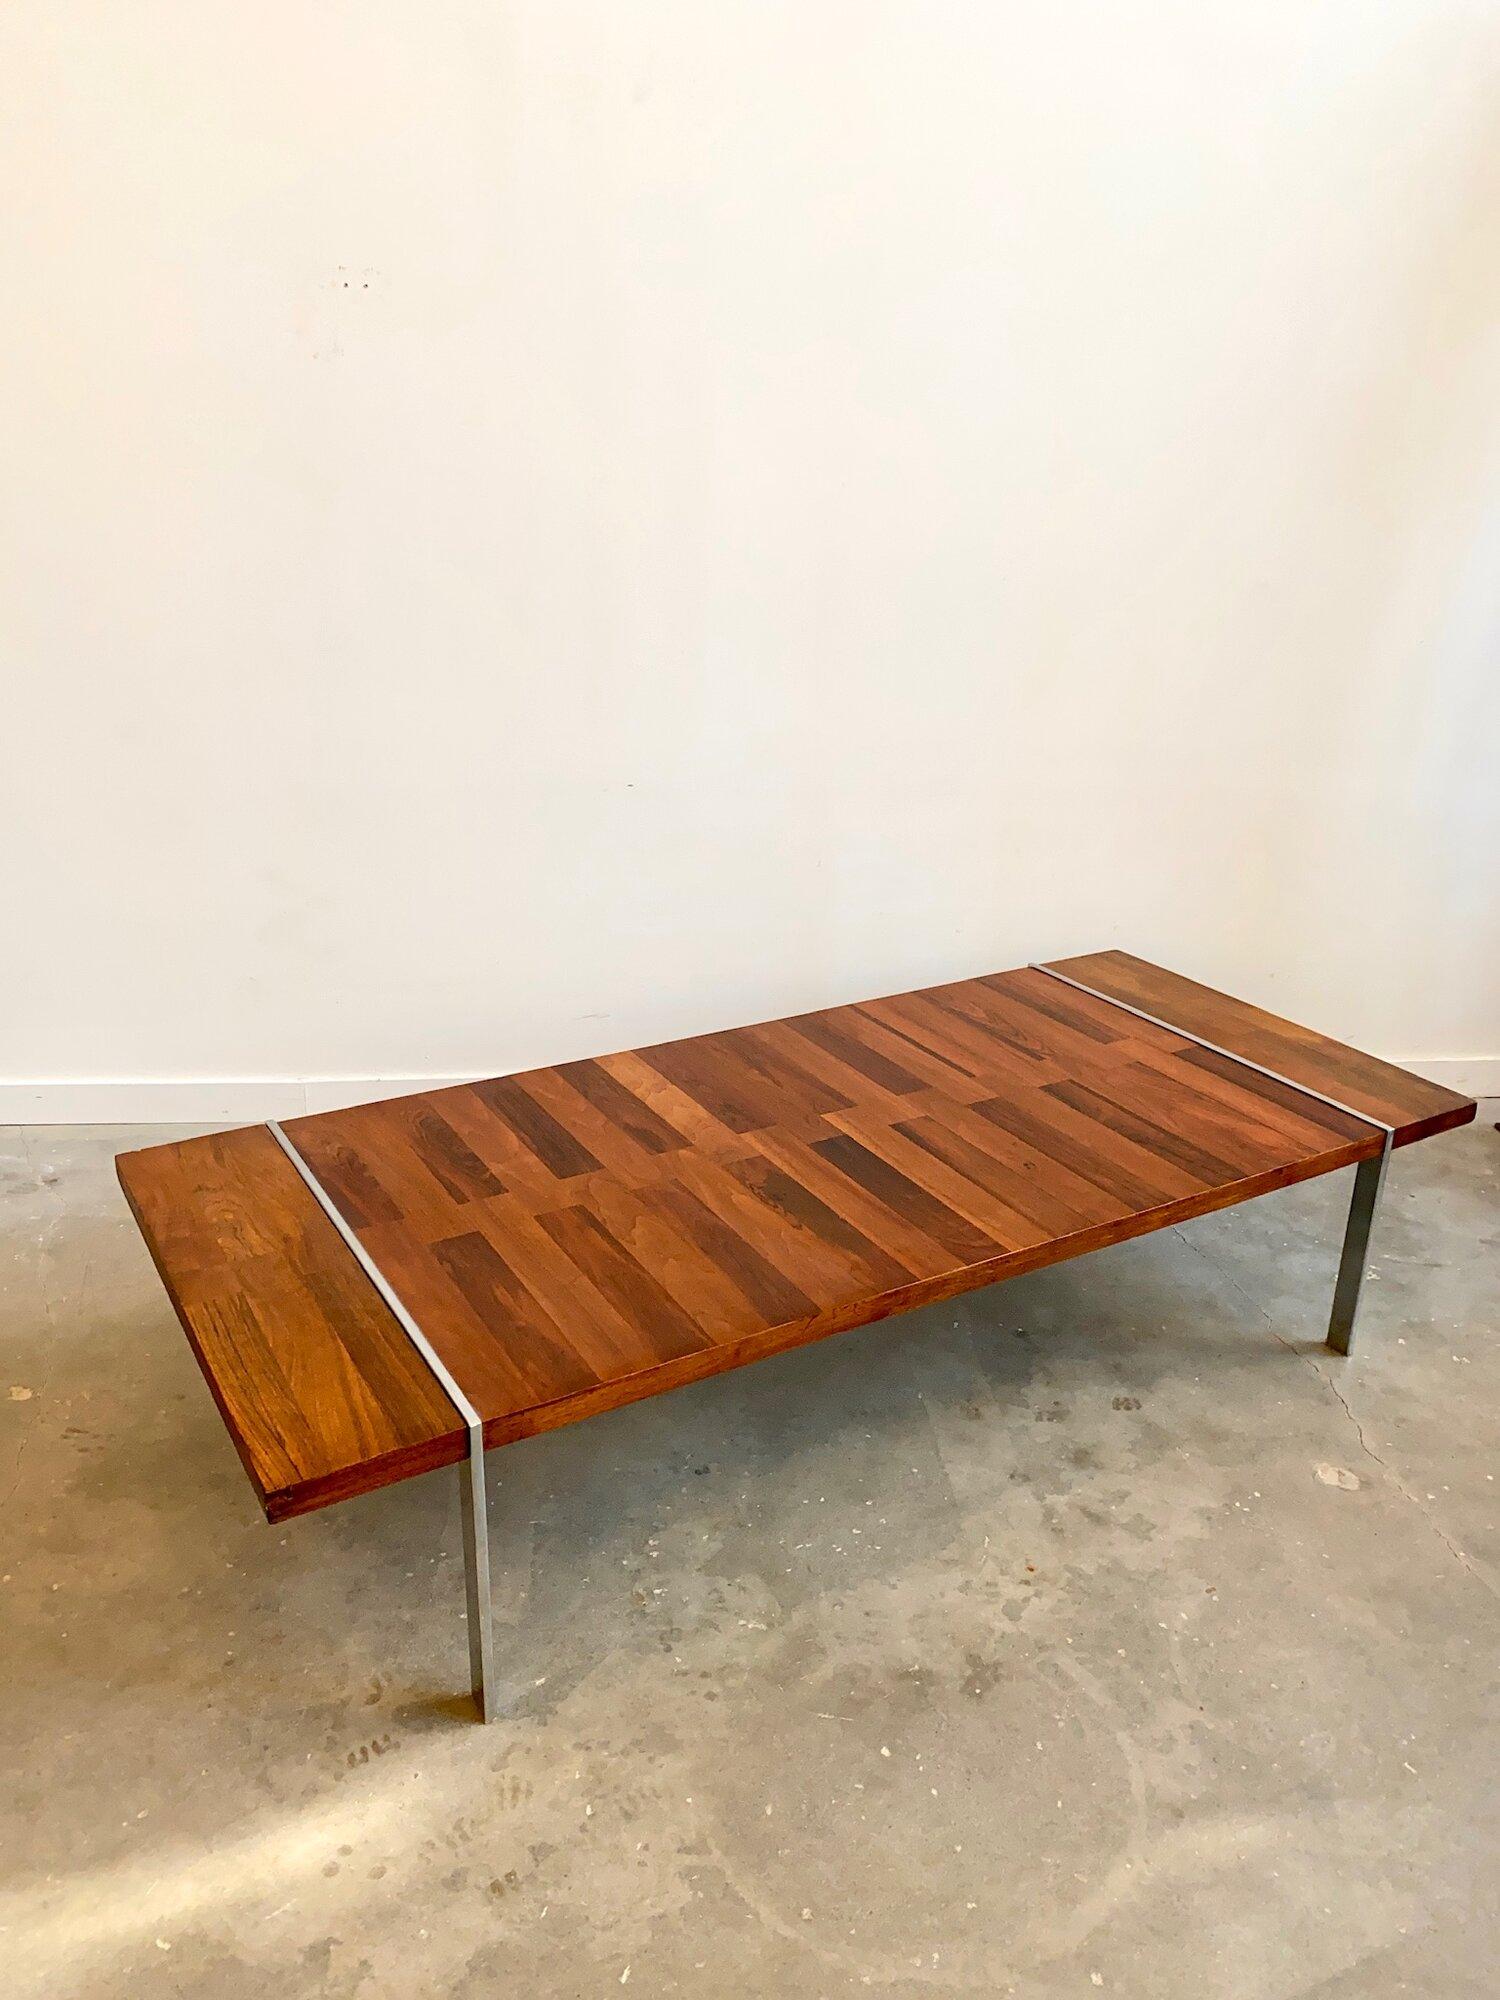 Mid-Century Modern Roland Carter rosewood coffee table by Lanes Vibrato Collection on chrome legs. -1965

Additional information:
Materials: Rosewood, chrome 
Period: 1960’s 
Condition: In good condition 
Place of Origin: USA
Dimensions: H